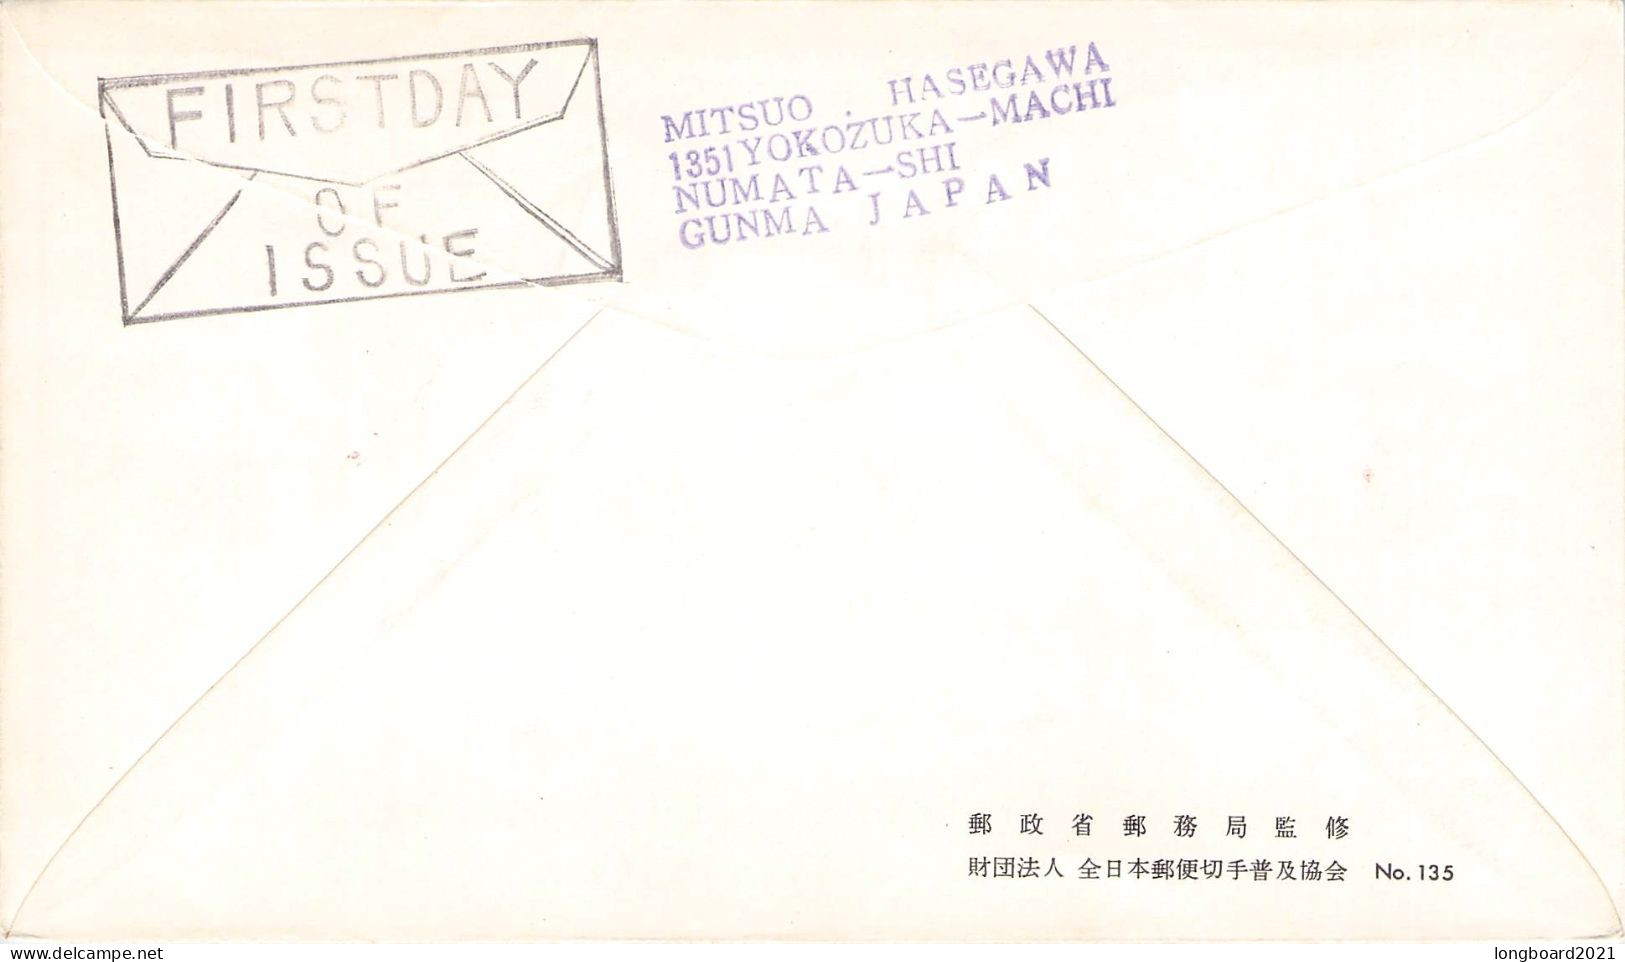 JAPAN - FDC OPENING OF THE TOKYO EXPRESSWAY 1964 Mi 867 / 7057 - FDC